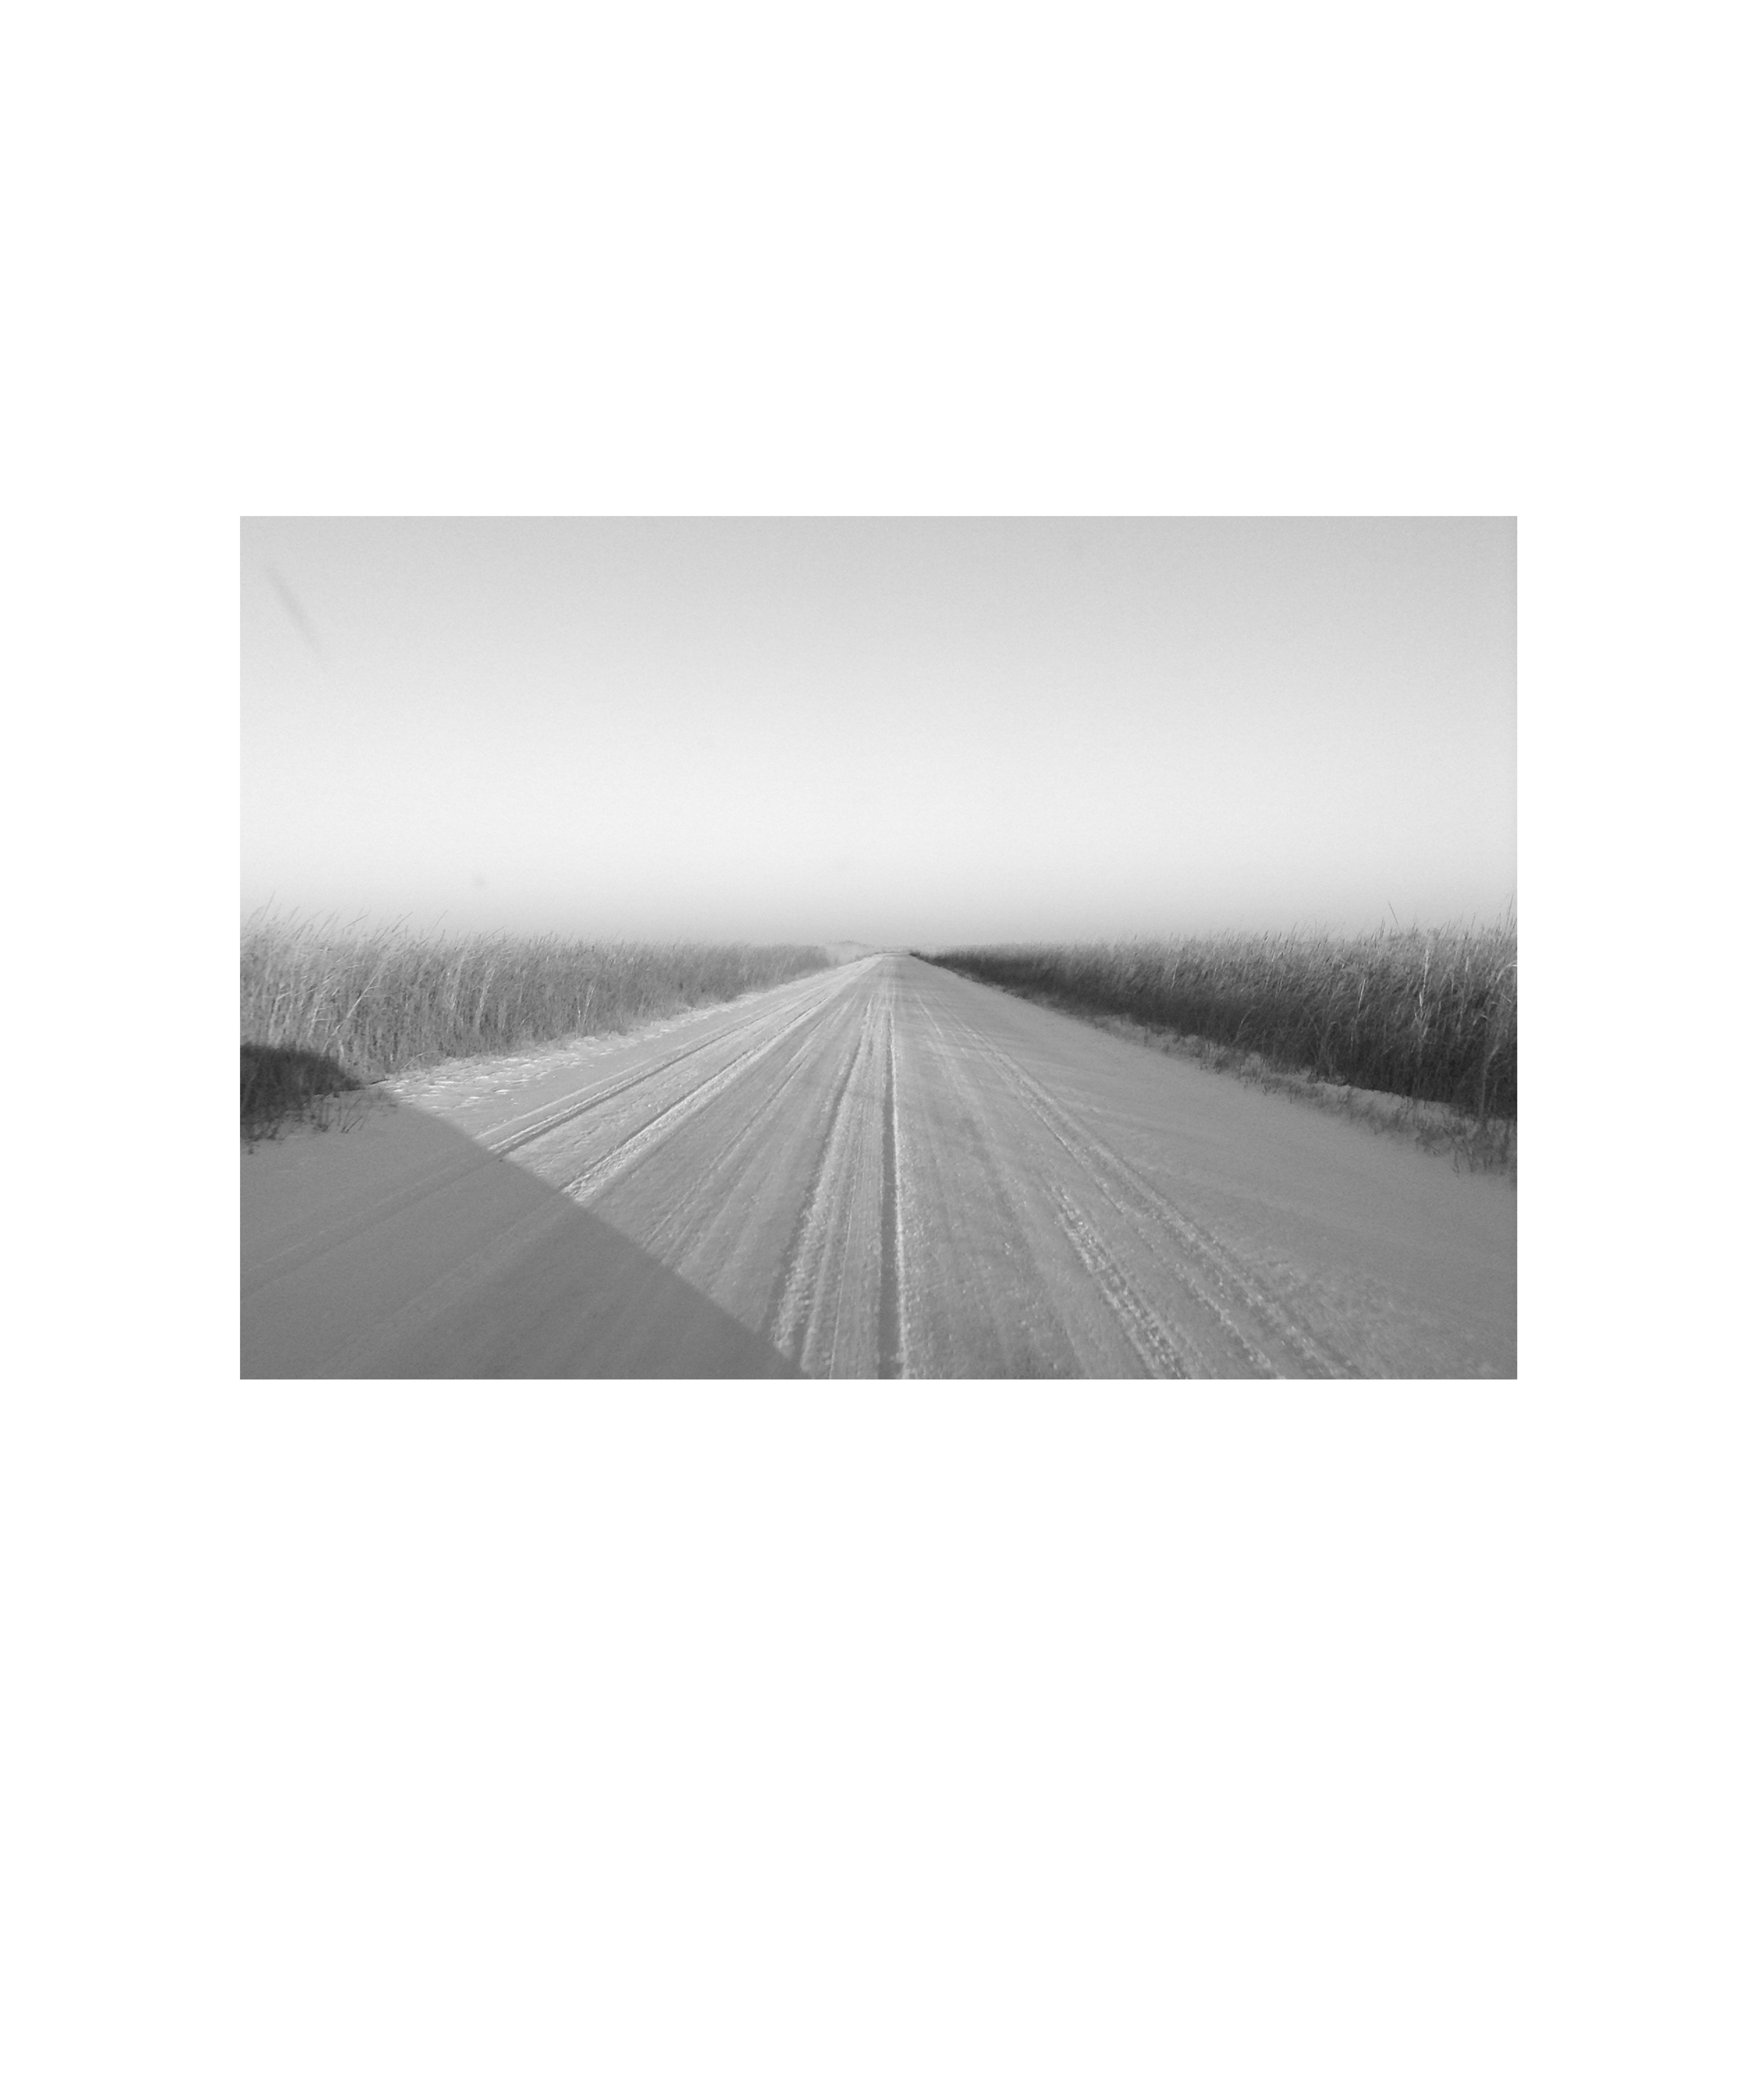 photograph of a country road in winter